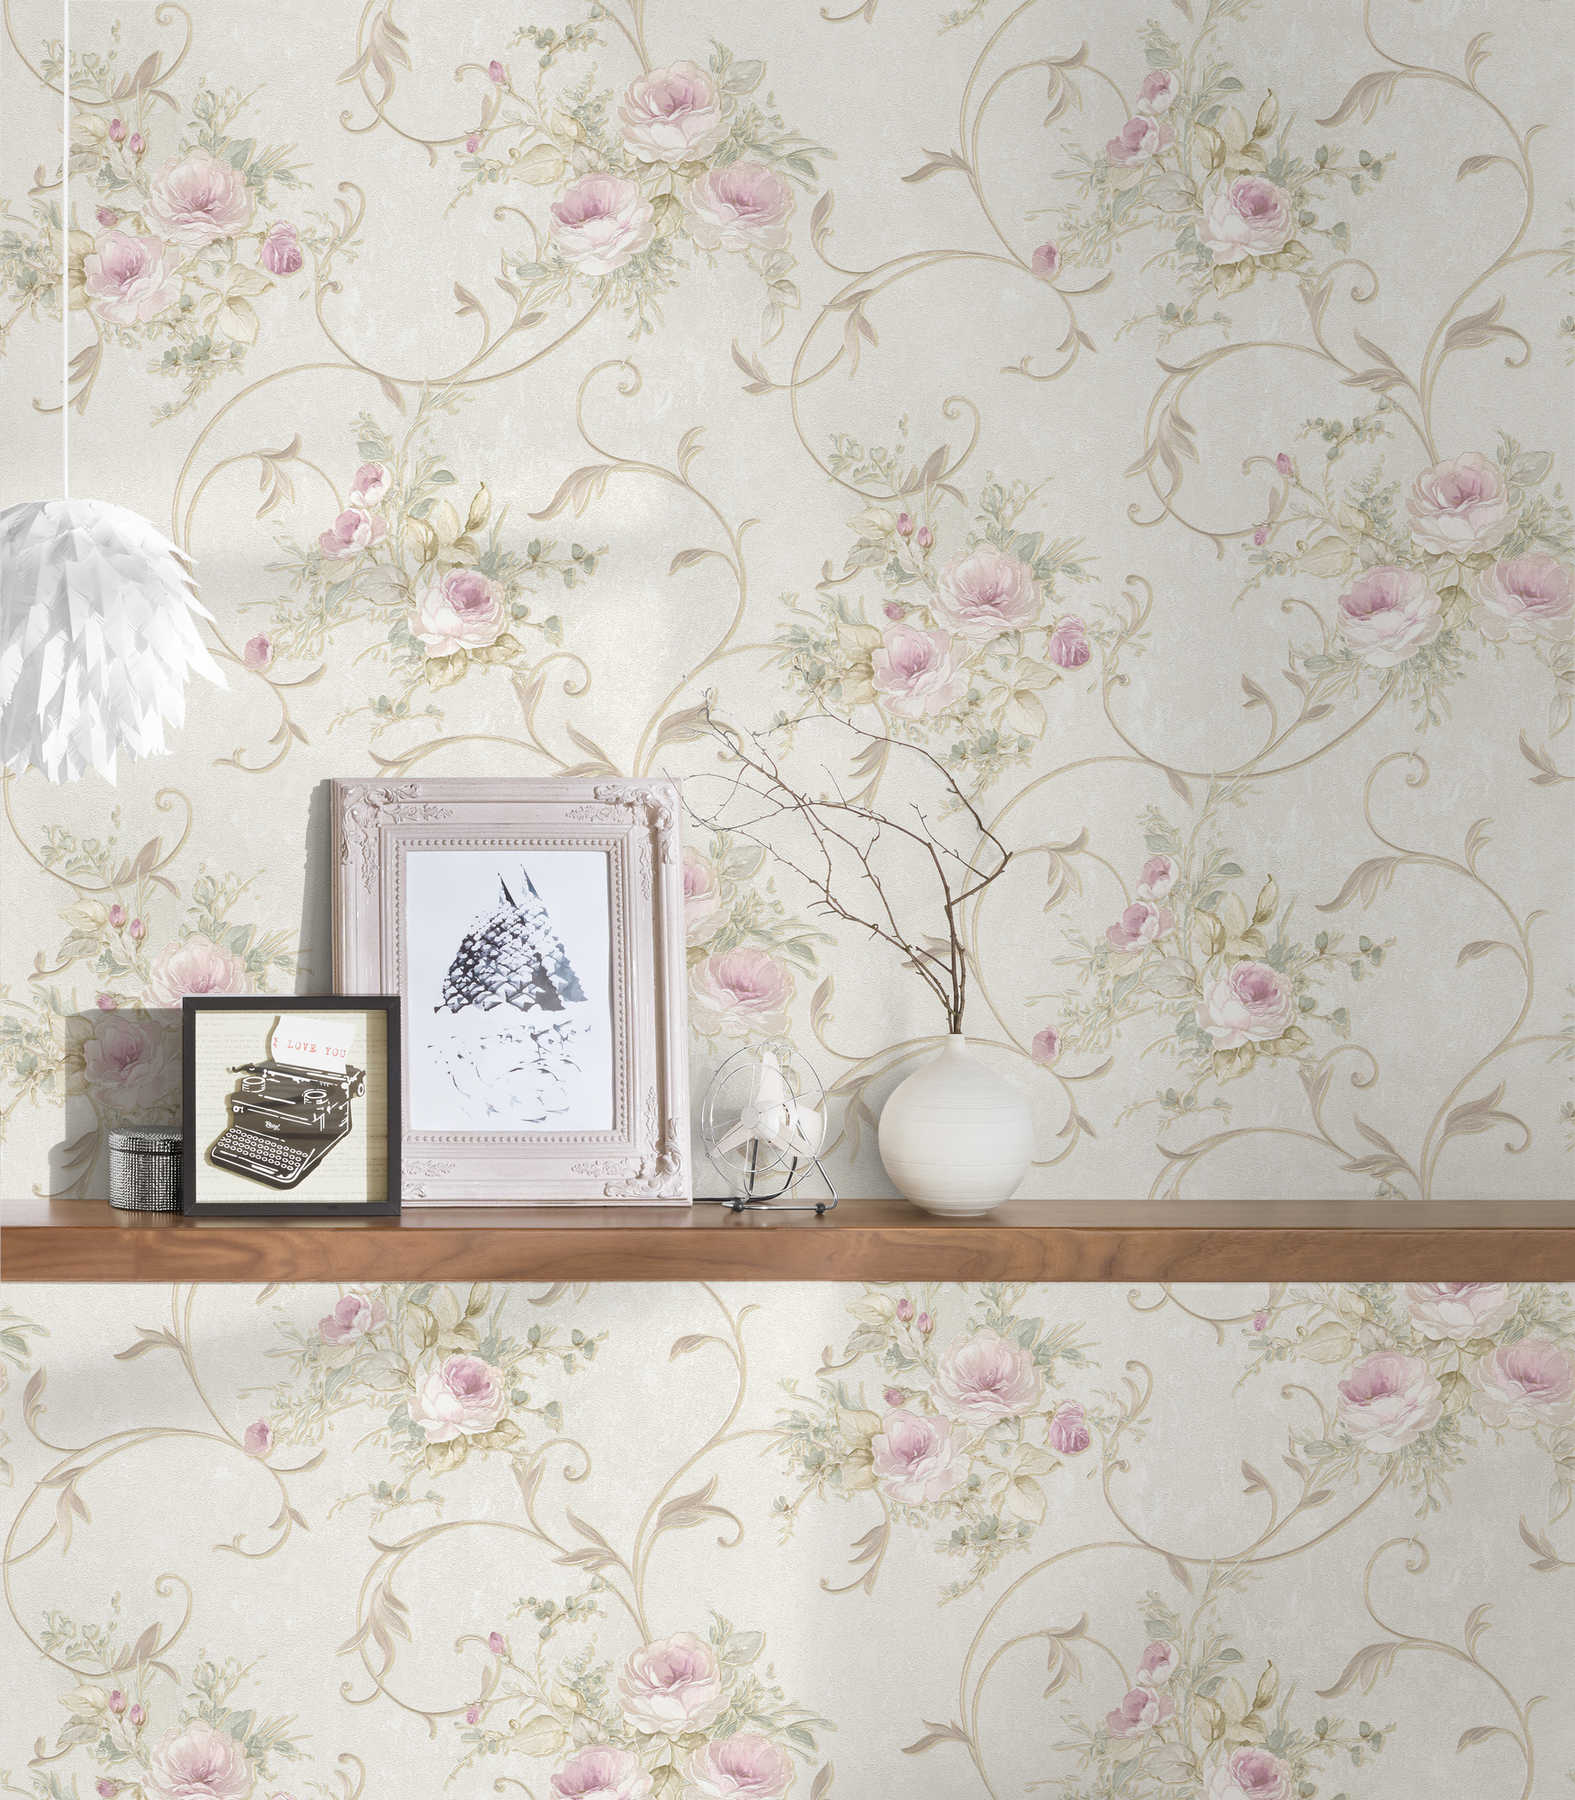             Rose wallpaper with metallic colours & tendril pattern - cream, green, pink
        